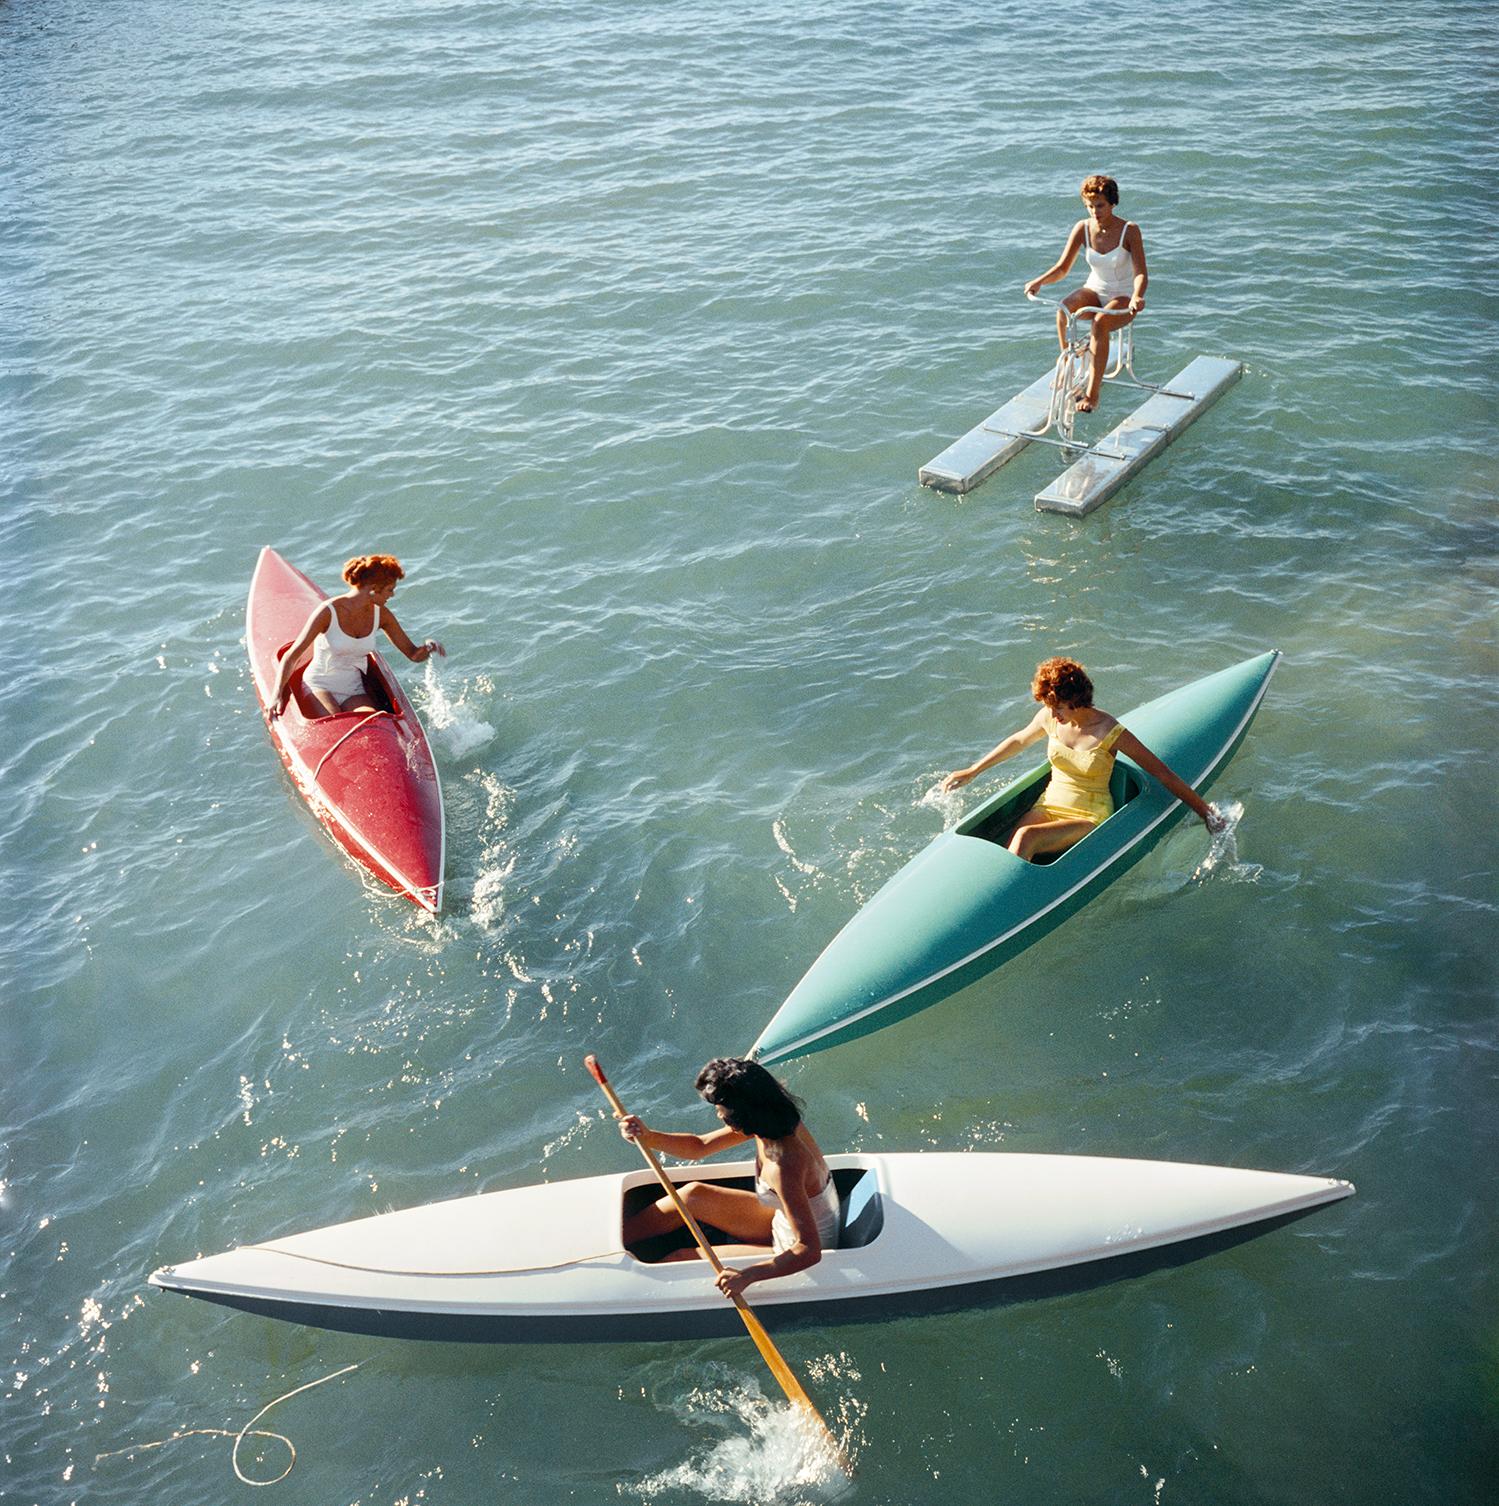 Slim Aarons
Lake Tahoe Trip
1959
C print
Estate stamped and hand numbered edition of 150 with certificate of authenticity from the estate. 

Young women canoeing at Zephyr Cove on the Nevada side of Lake Tahoe, USA, 1959. (Photo by Slim